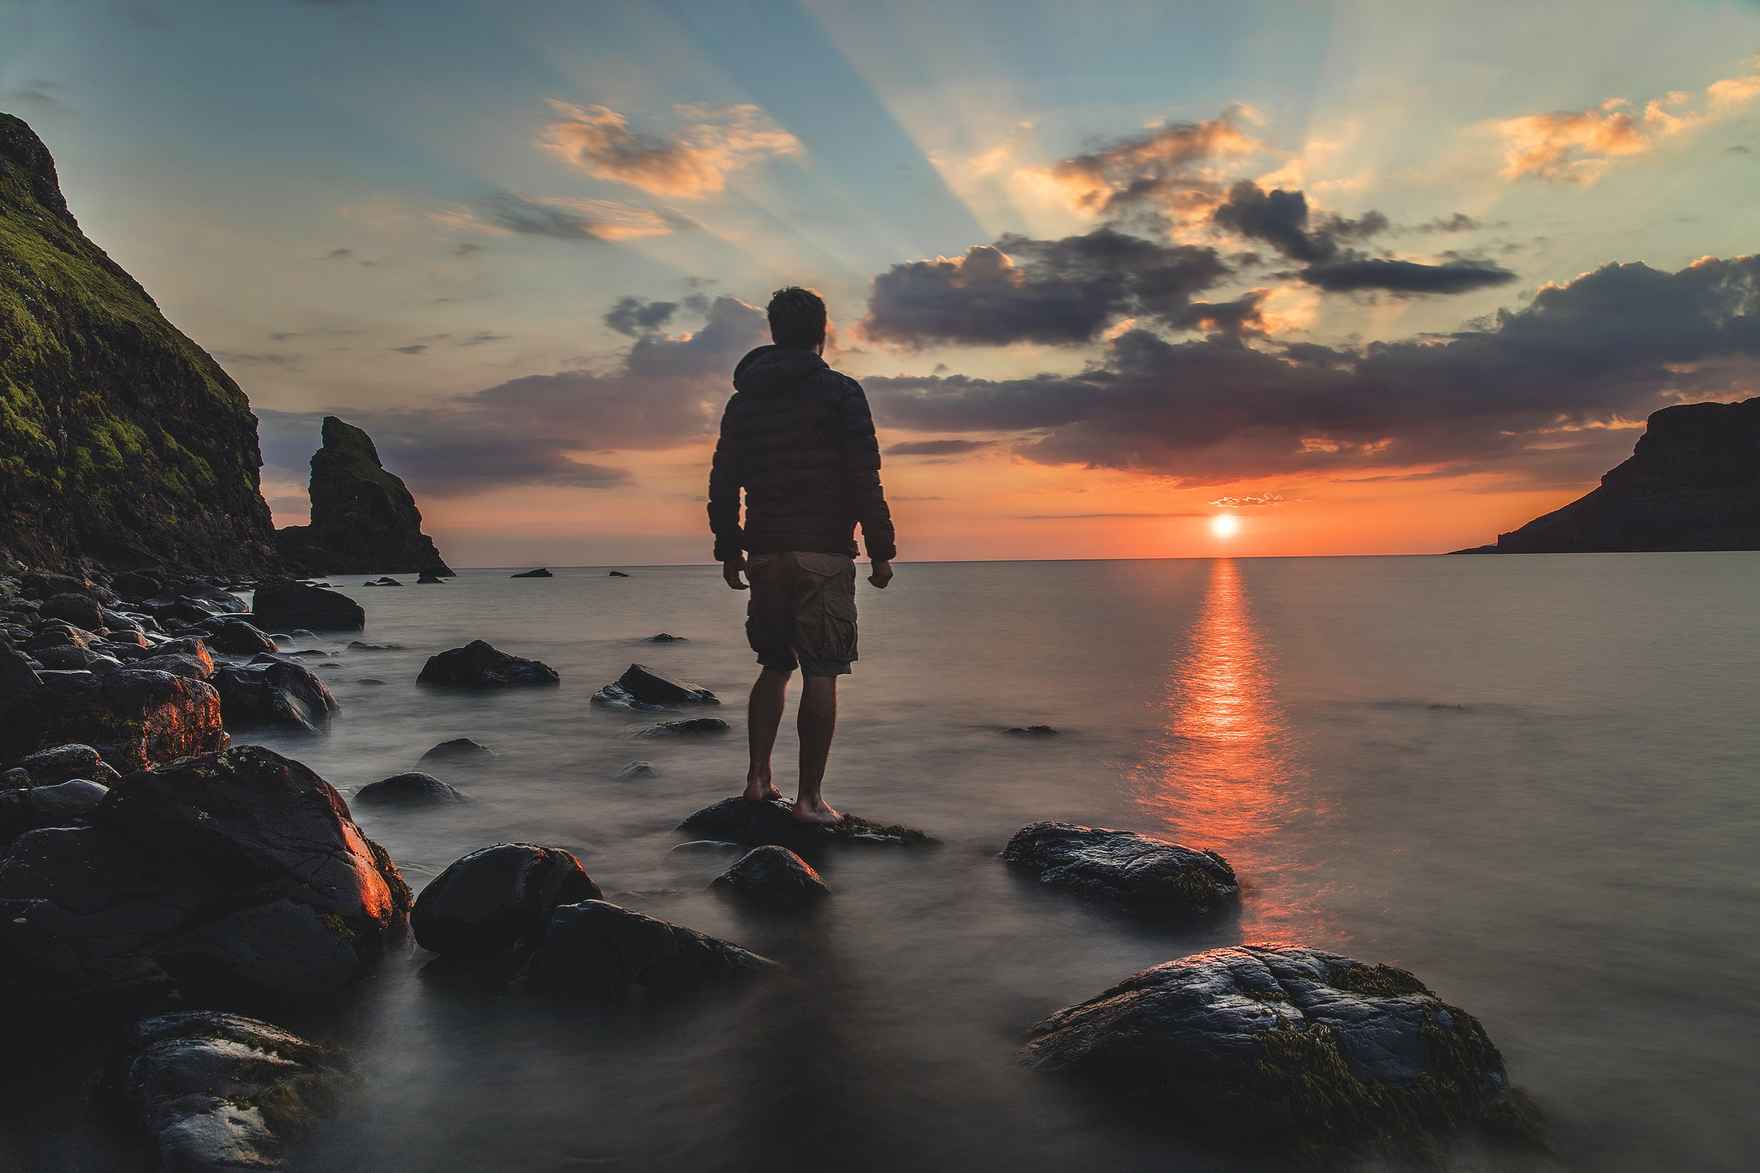 Man standing at edge of water looking at sunset